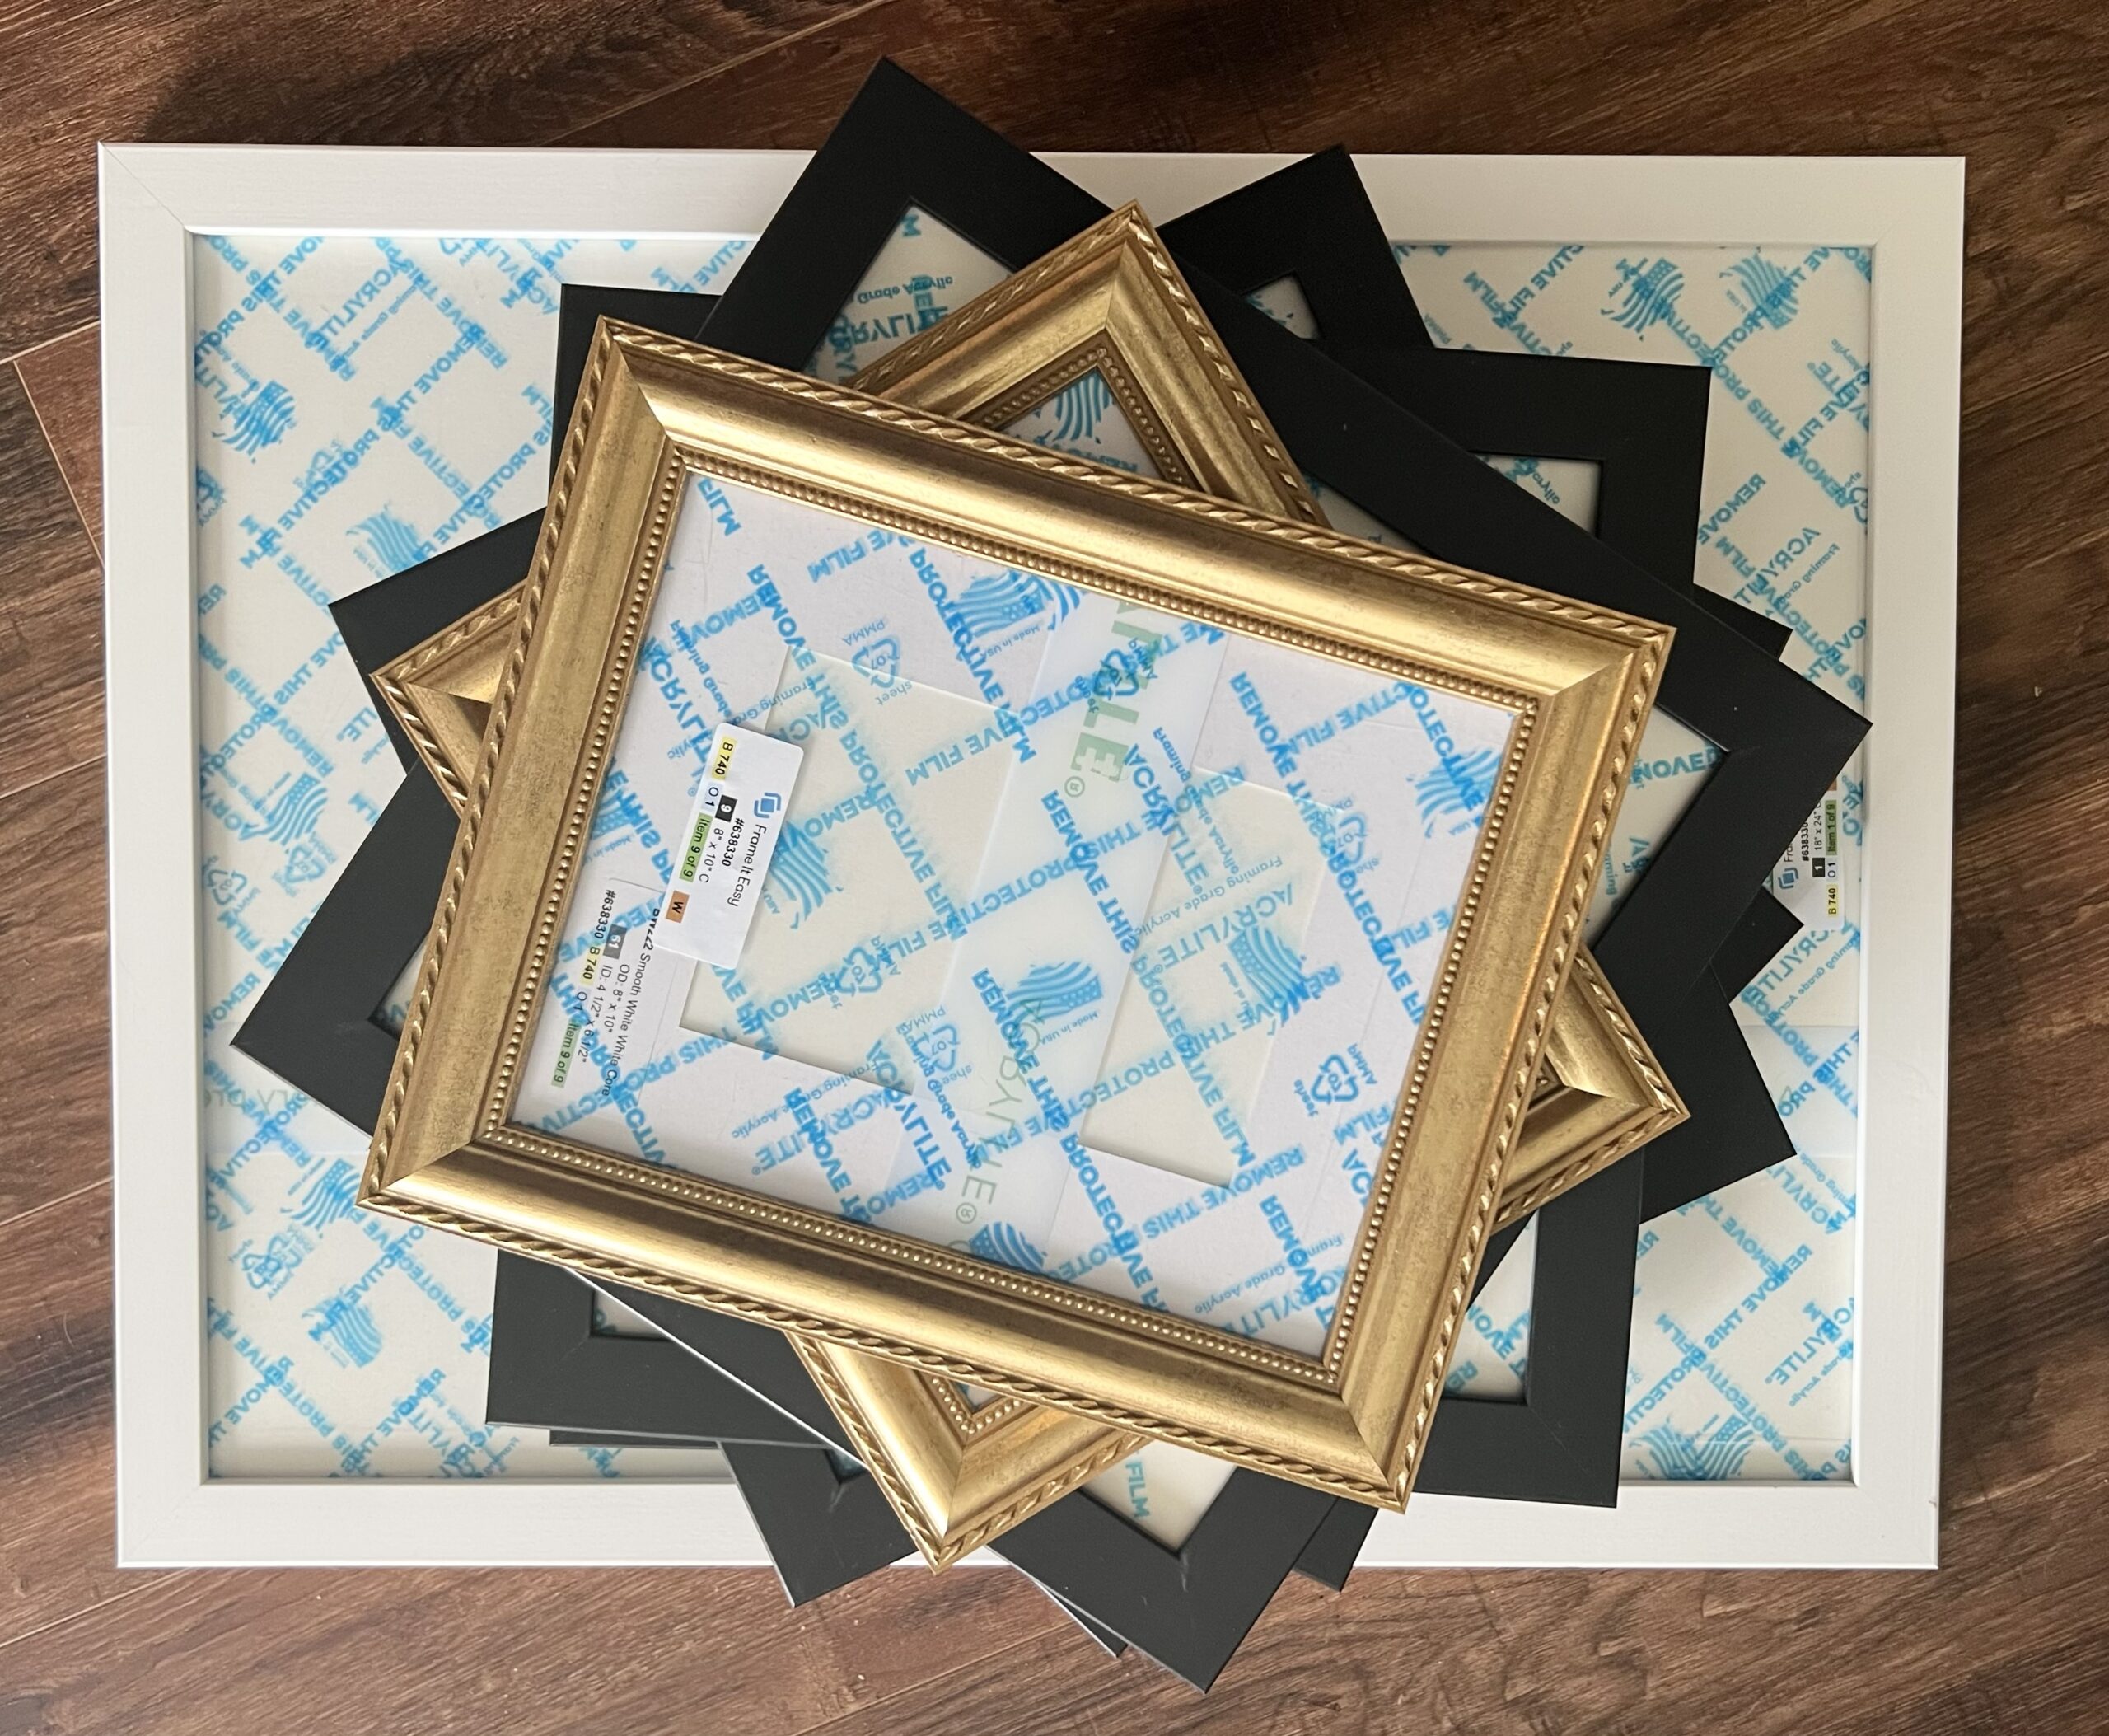 Framing 101: How to Frame Art Cheap and Easy – Elizabeth Person Art & Design